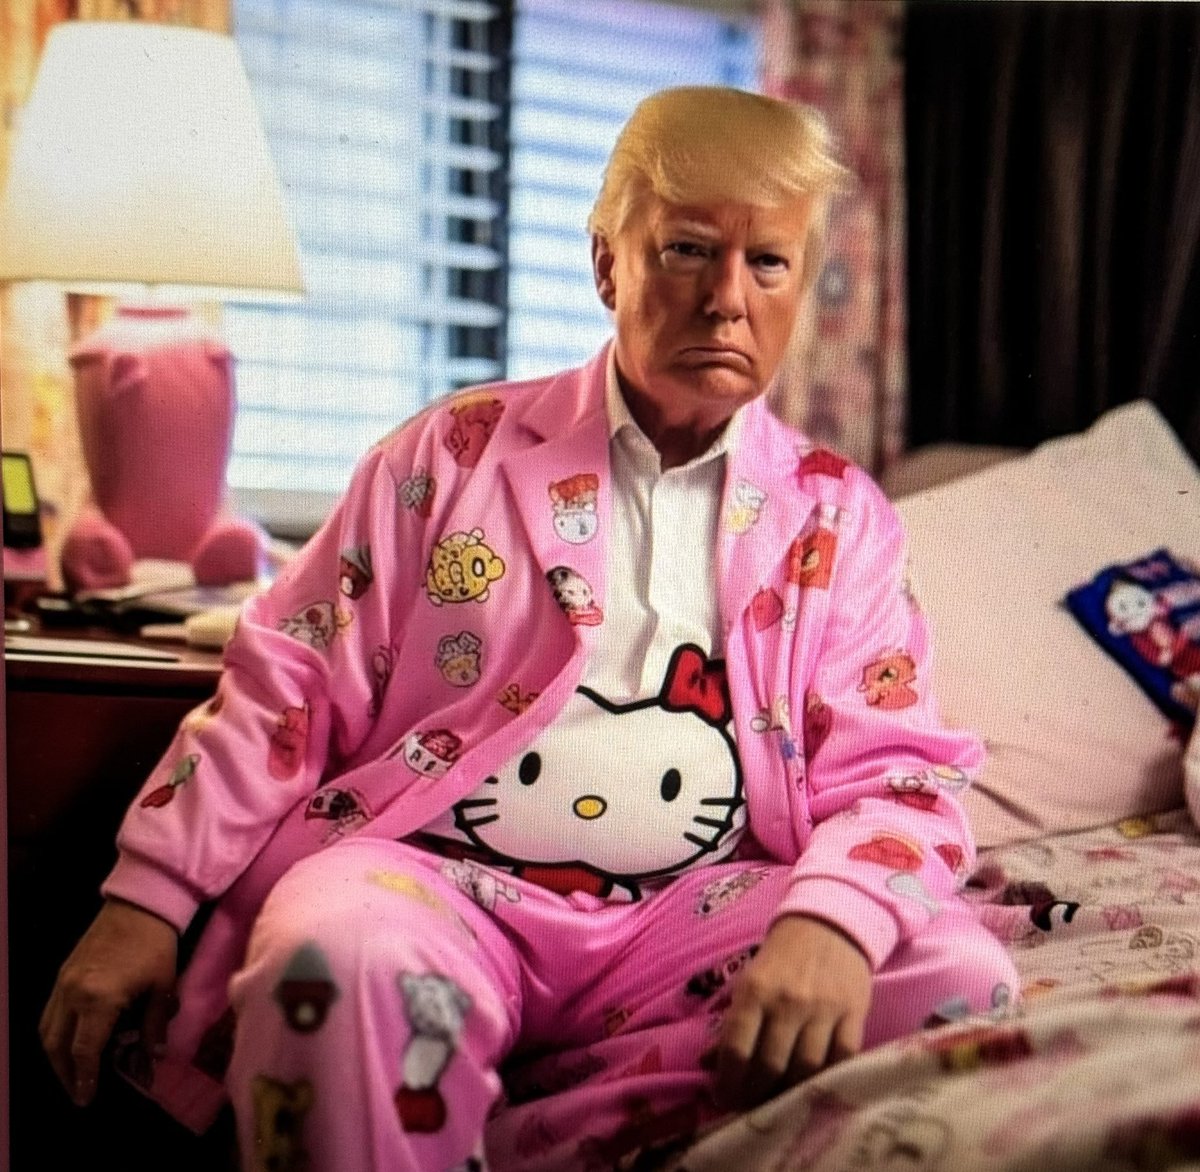 @TomJChicago Skinny case. Easy to prove. DO IT -pajama party at Bedminster #TrumpSmellsLikeAss